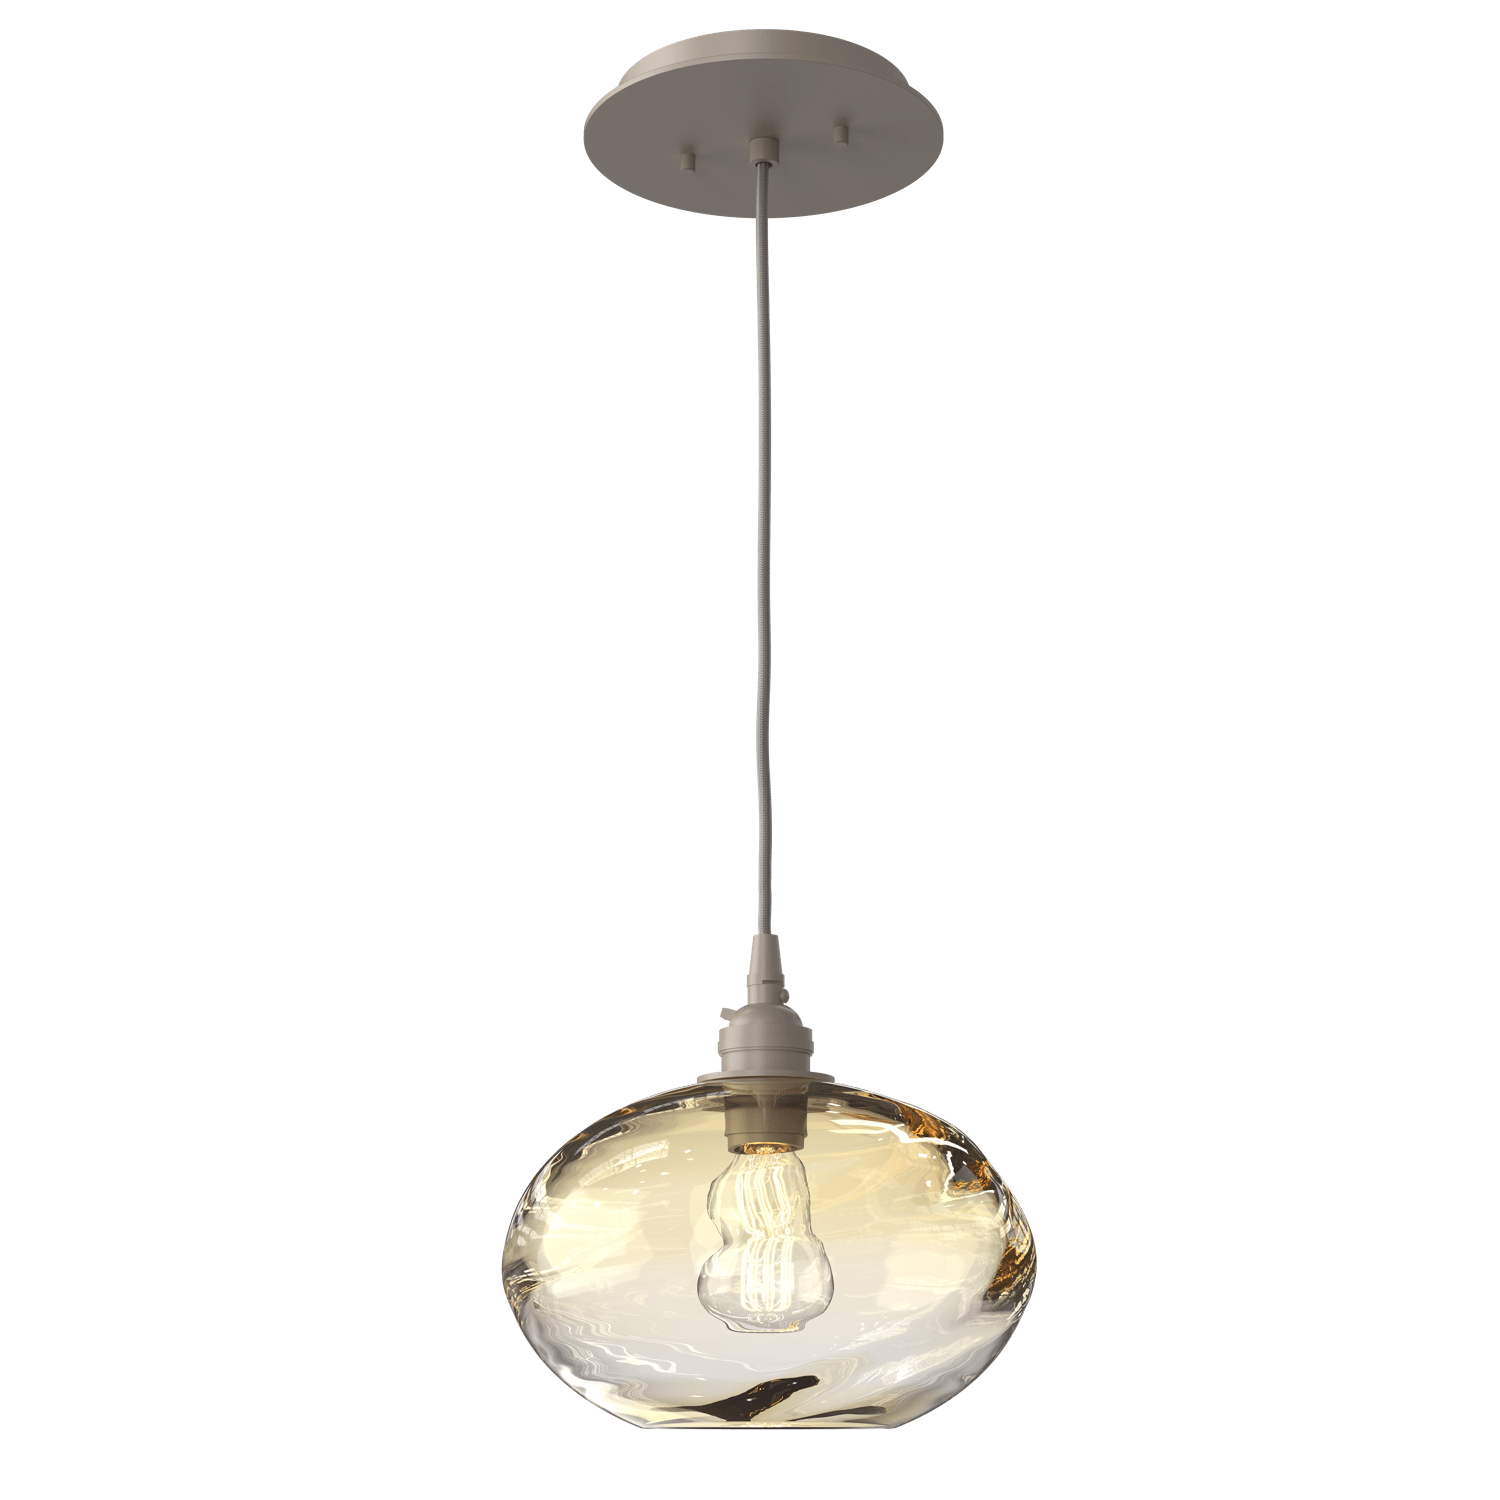 LAB0036-01-BS-OA-Hammerton-Studio-Optic-Blown-Glass-Coppa-pendant-light-with-metallic-beige-silver-finish-and-optic-amber-blown-glass-shades-and-incandescent-lamping